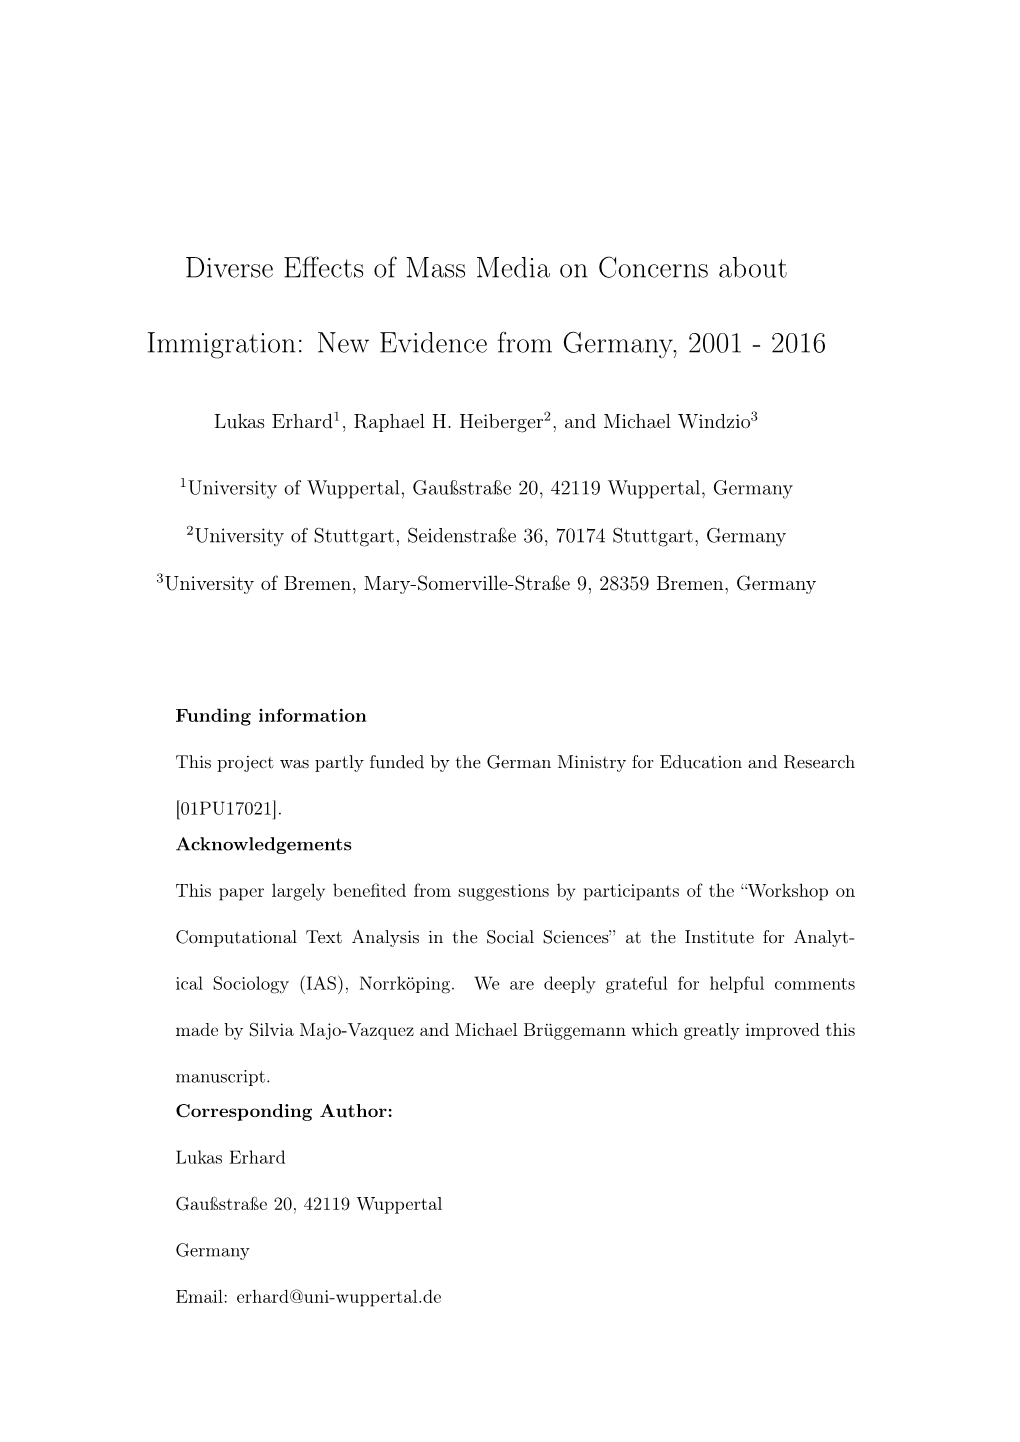 Diverse Effects of Mass Media on Concerns About Immigration